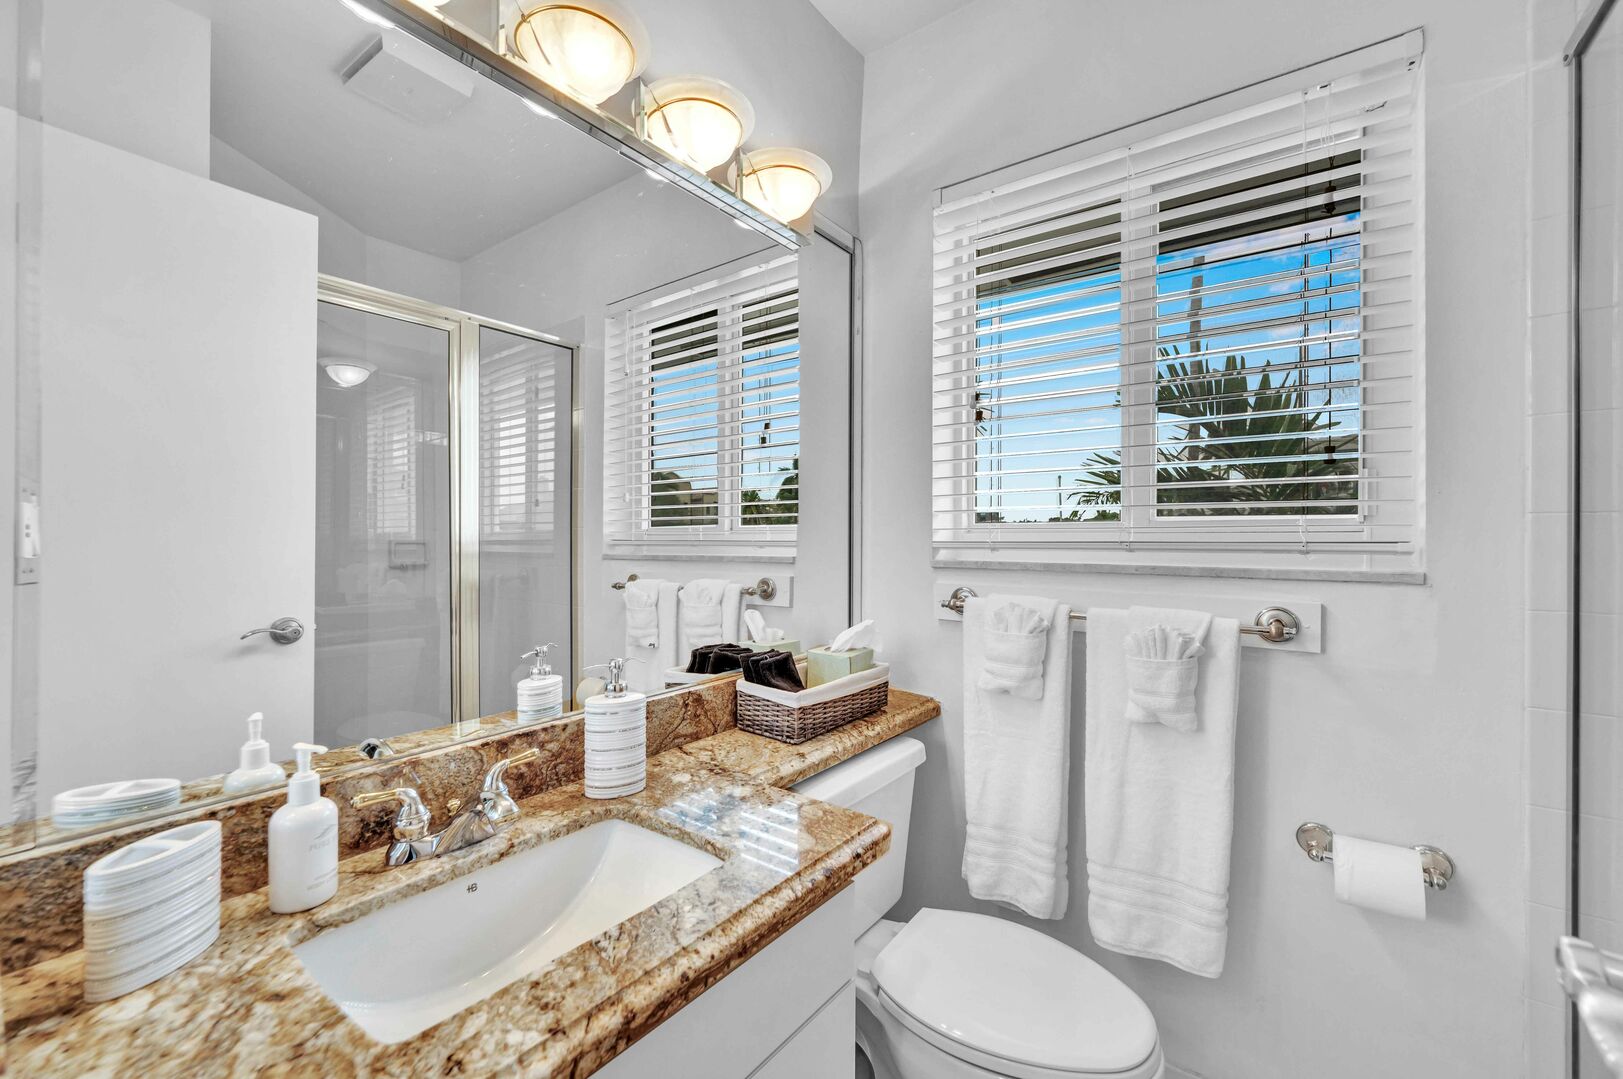 The en-suite bathroom off the upstairs guest room has a shower and includes Latitude Key's signature spa soaps.